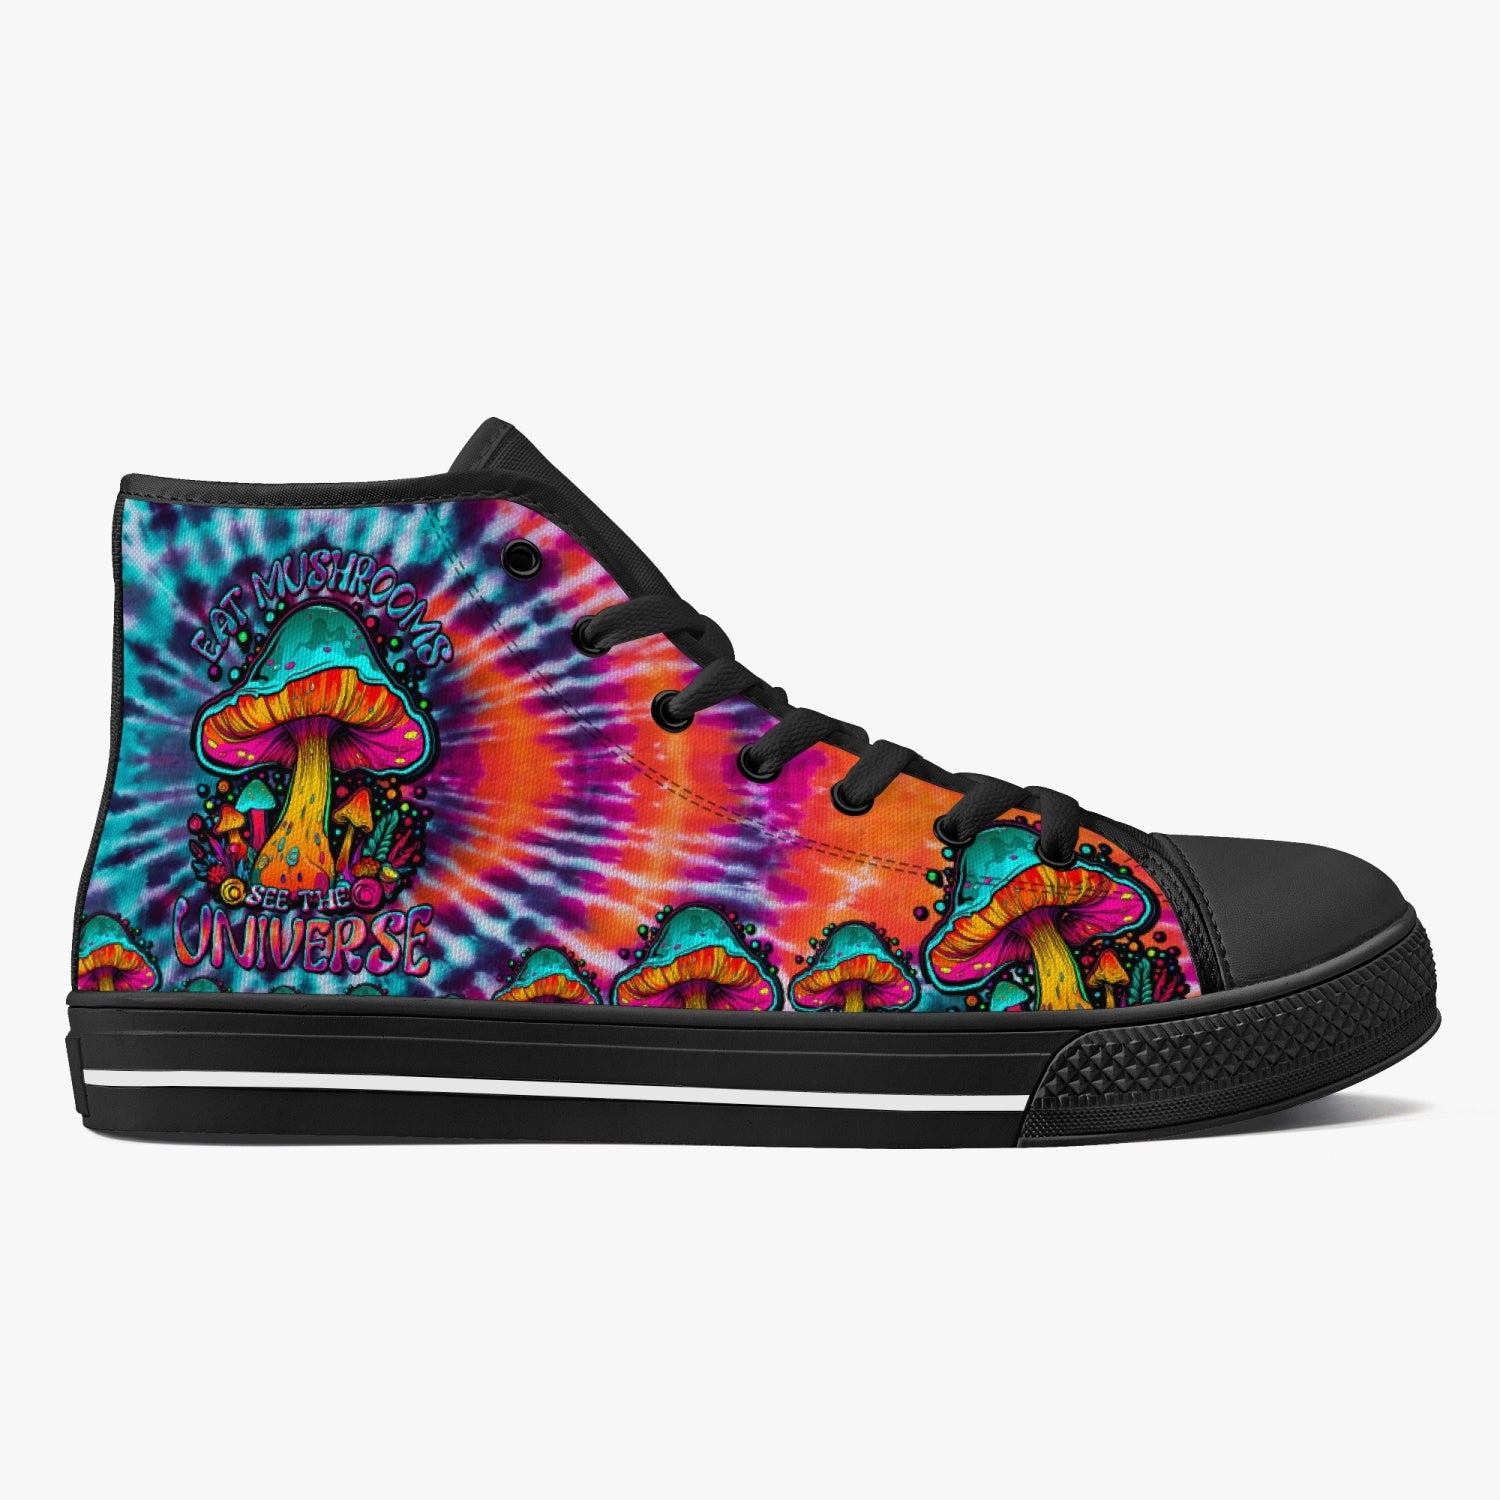 EAT MUSHROOMS SEE THE UNIVERSE TIE DYE HIGH TOP CANVAS SHOES - TLTW27072310